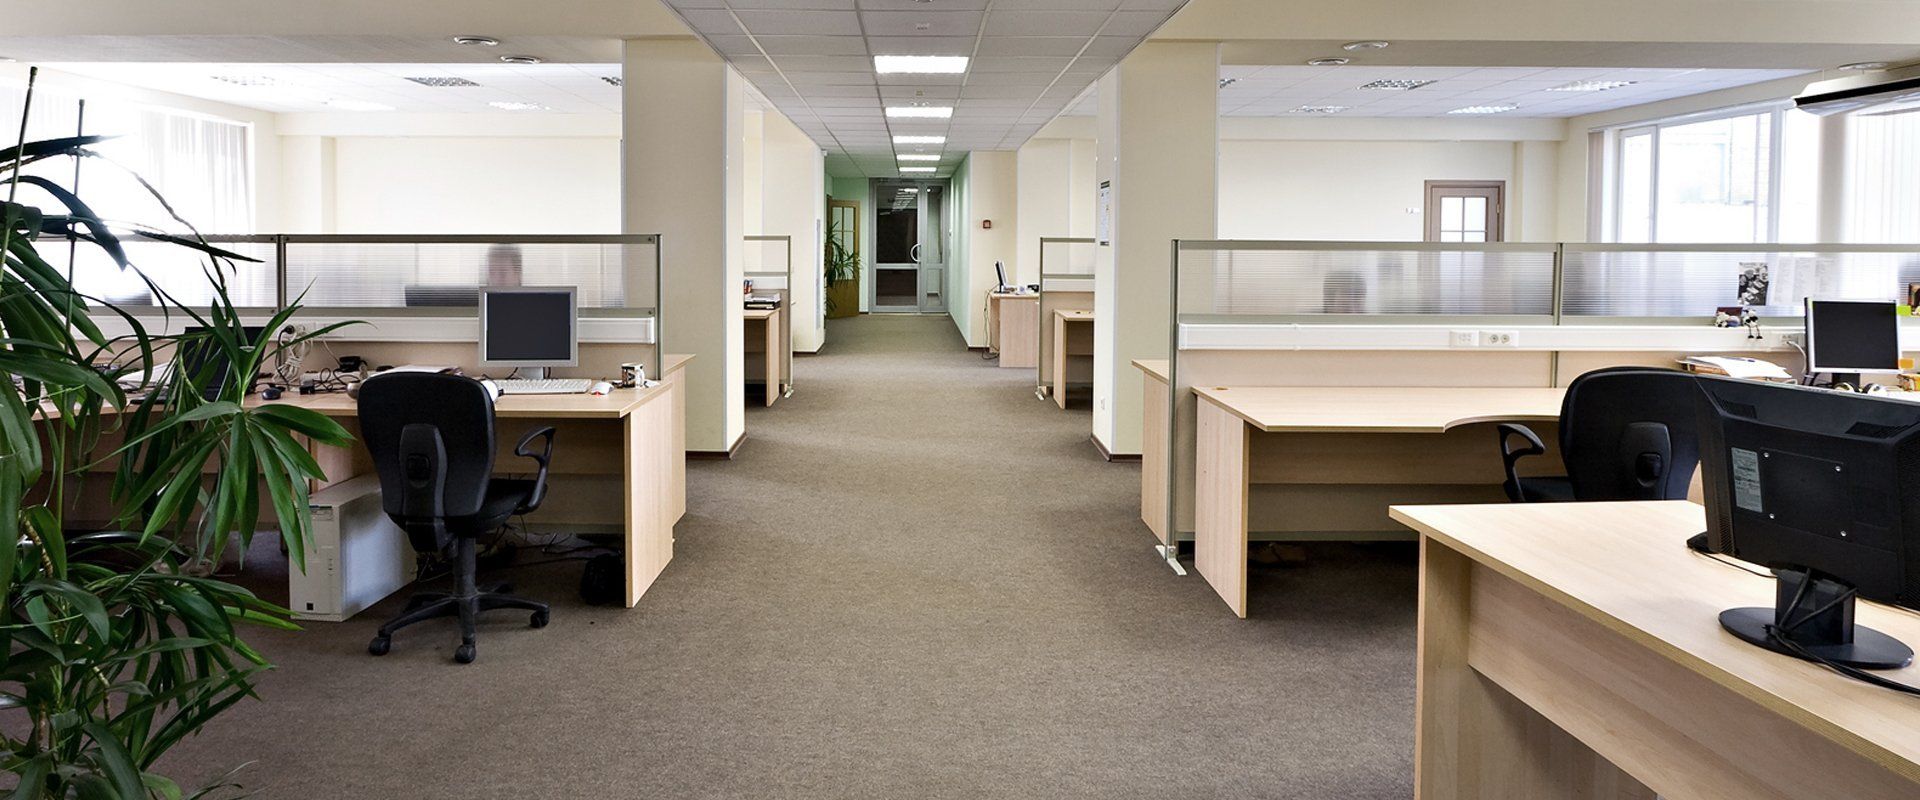 cleaner office interiors